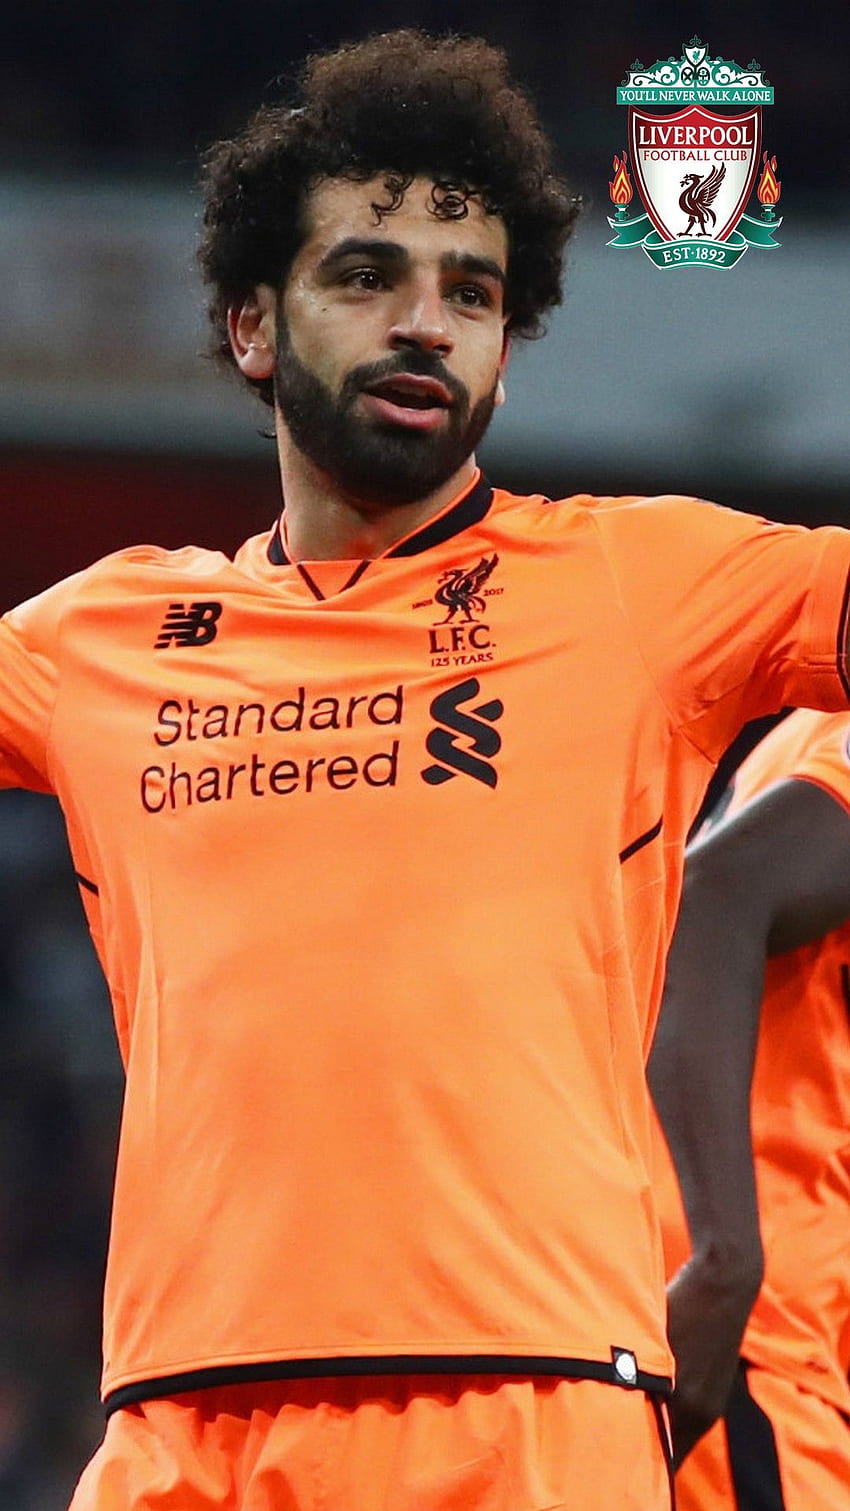 Liverpool Mohamed Salah Android - 2019 Android wallpaper ponsel HD